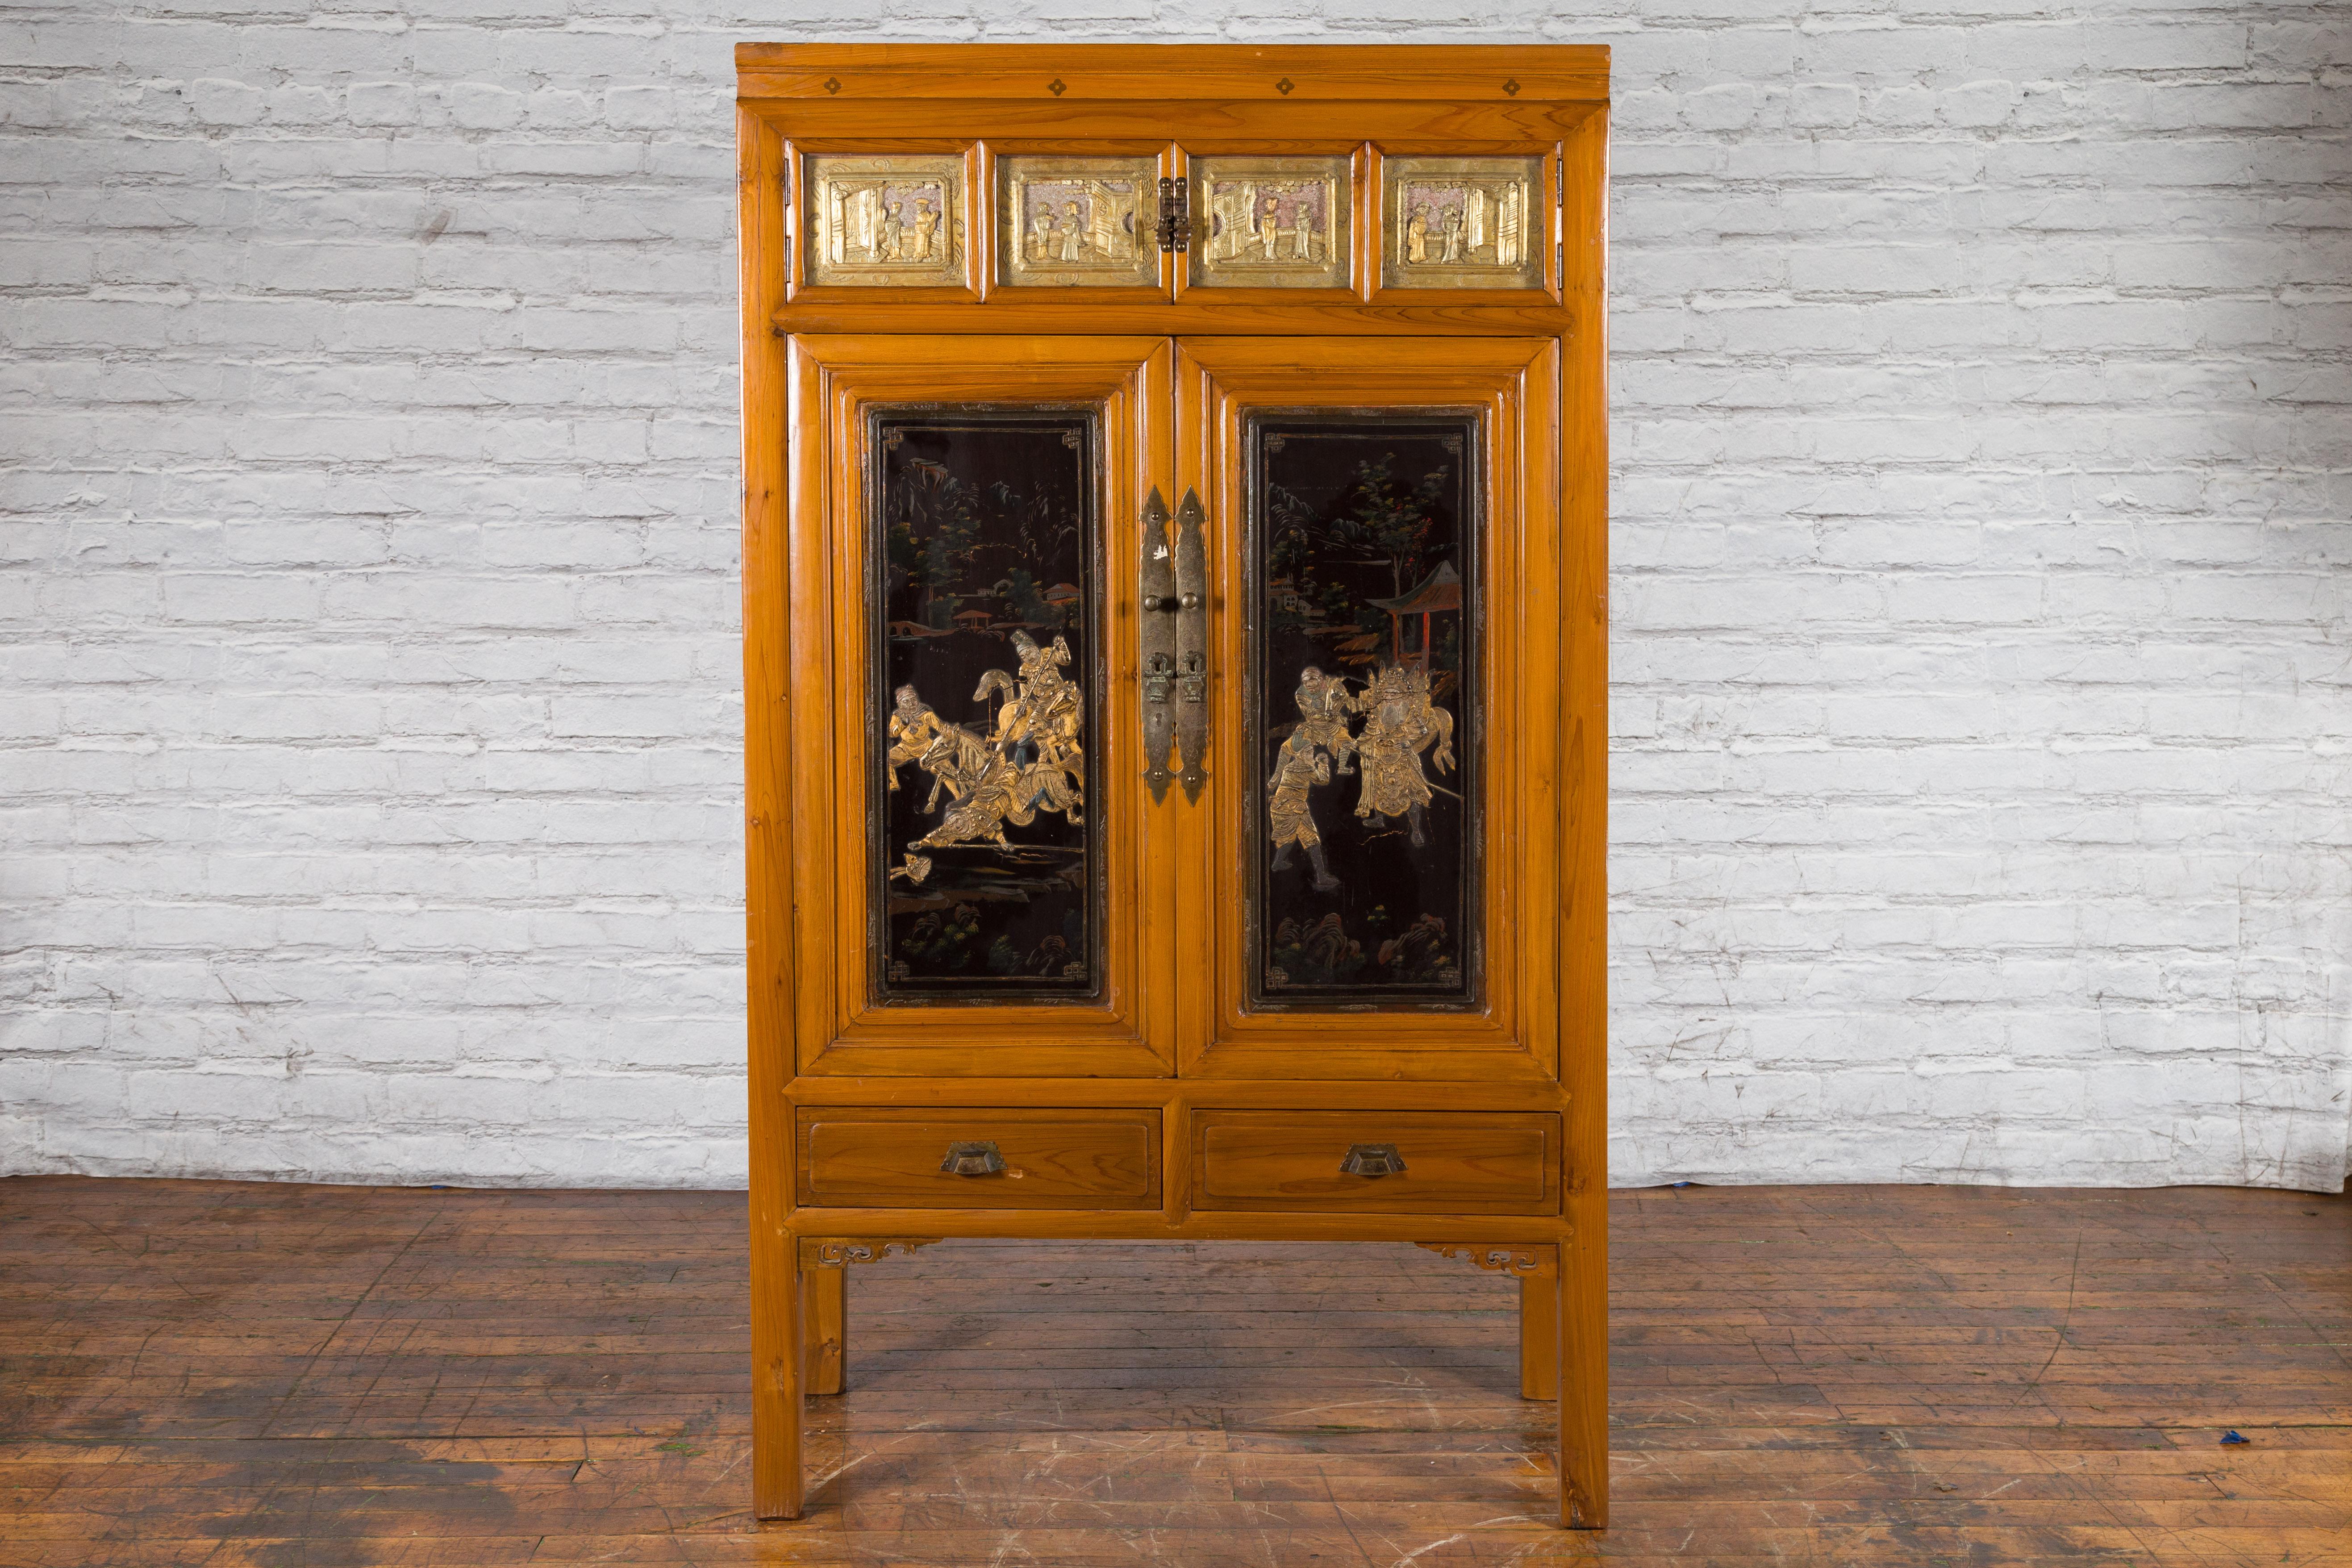 Early 20th century Chinese lacquered wood armoire with hand-carved gilt panels, doors and drawers. Created in the early years of the 20th century, this Chinese armoire features a linear silhouette accented by a natural wood patina. Two small doors